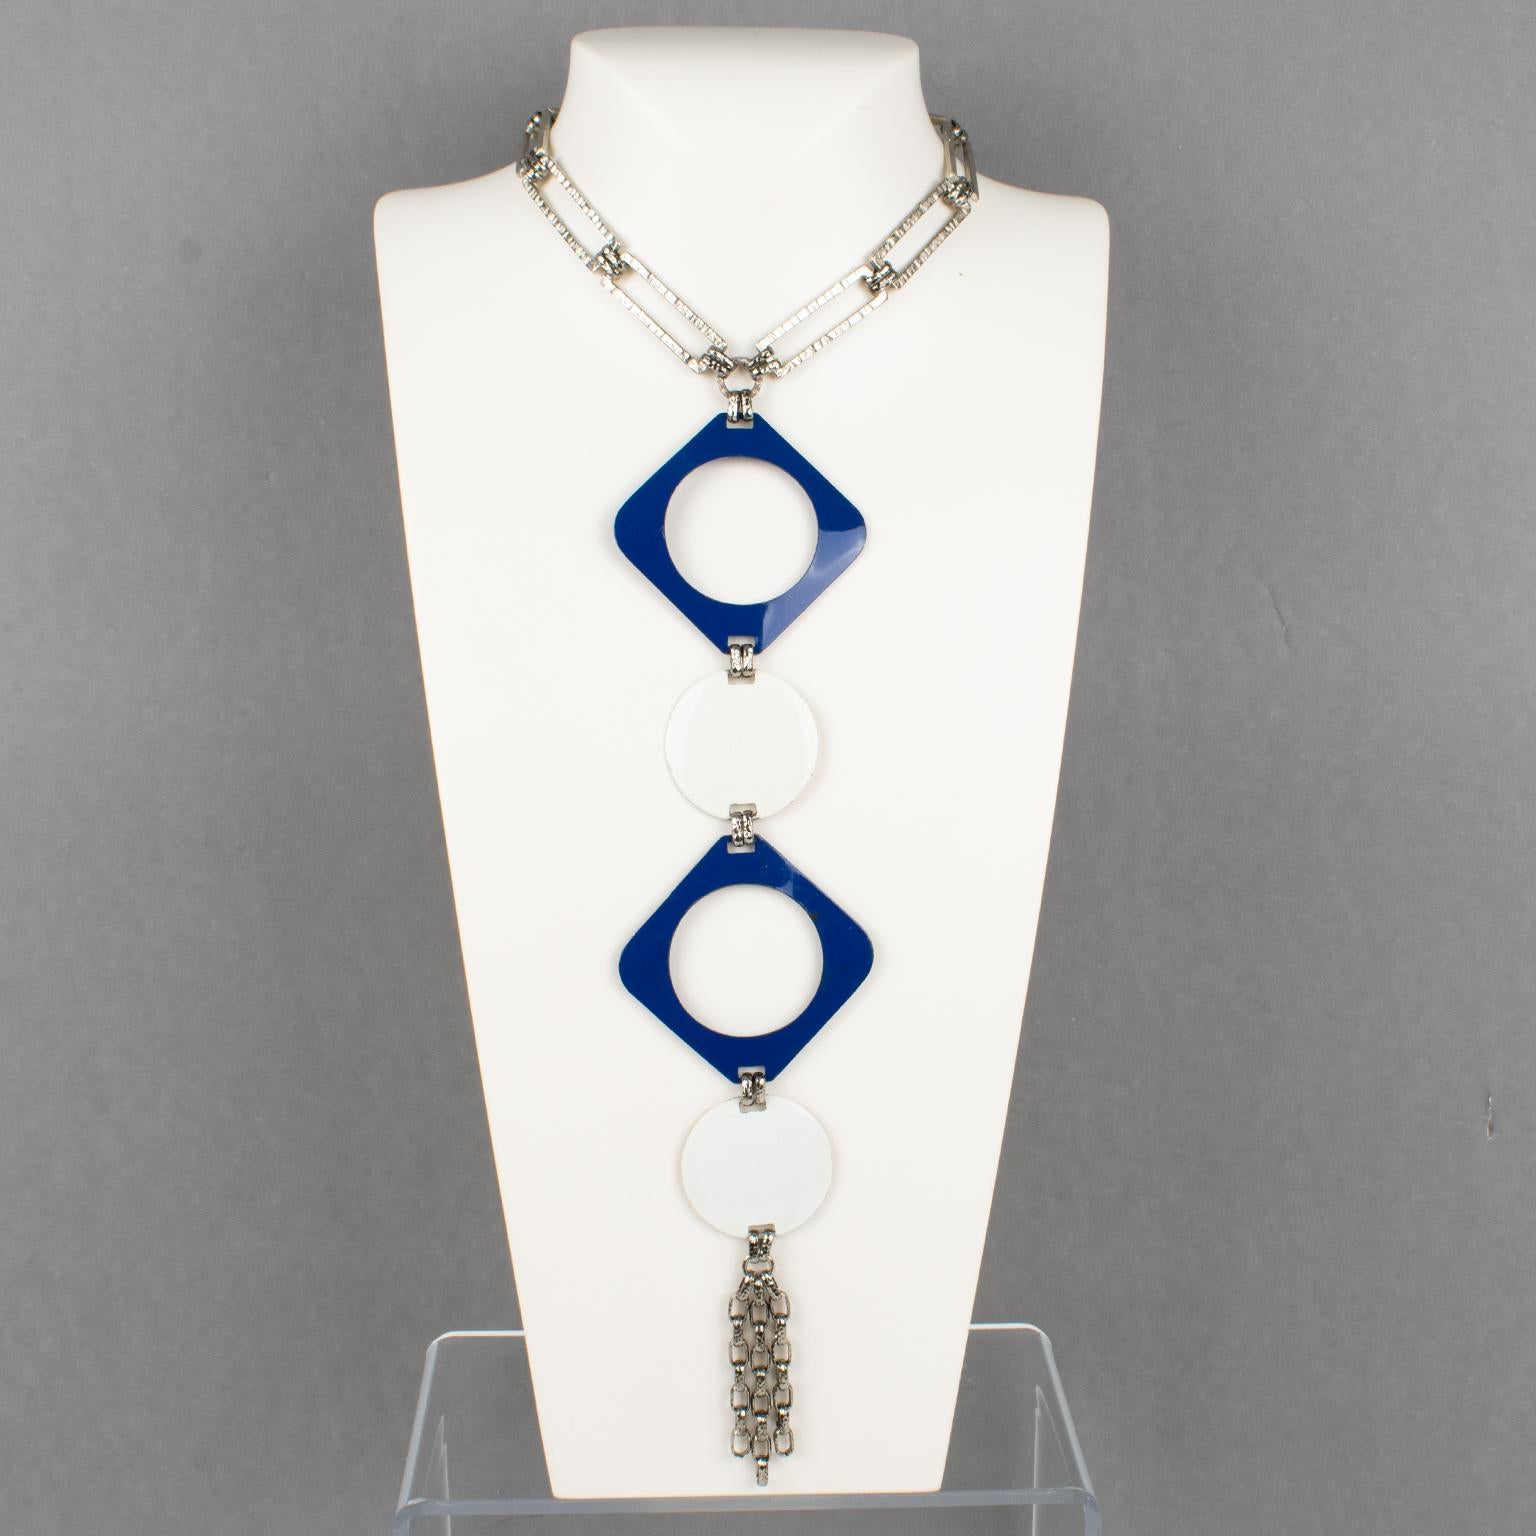 Modernist Paco Rabanne Style Space Age Collar Necklace with Blue and White Enamel, 1960s For Sale